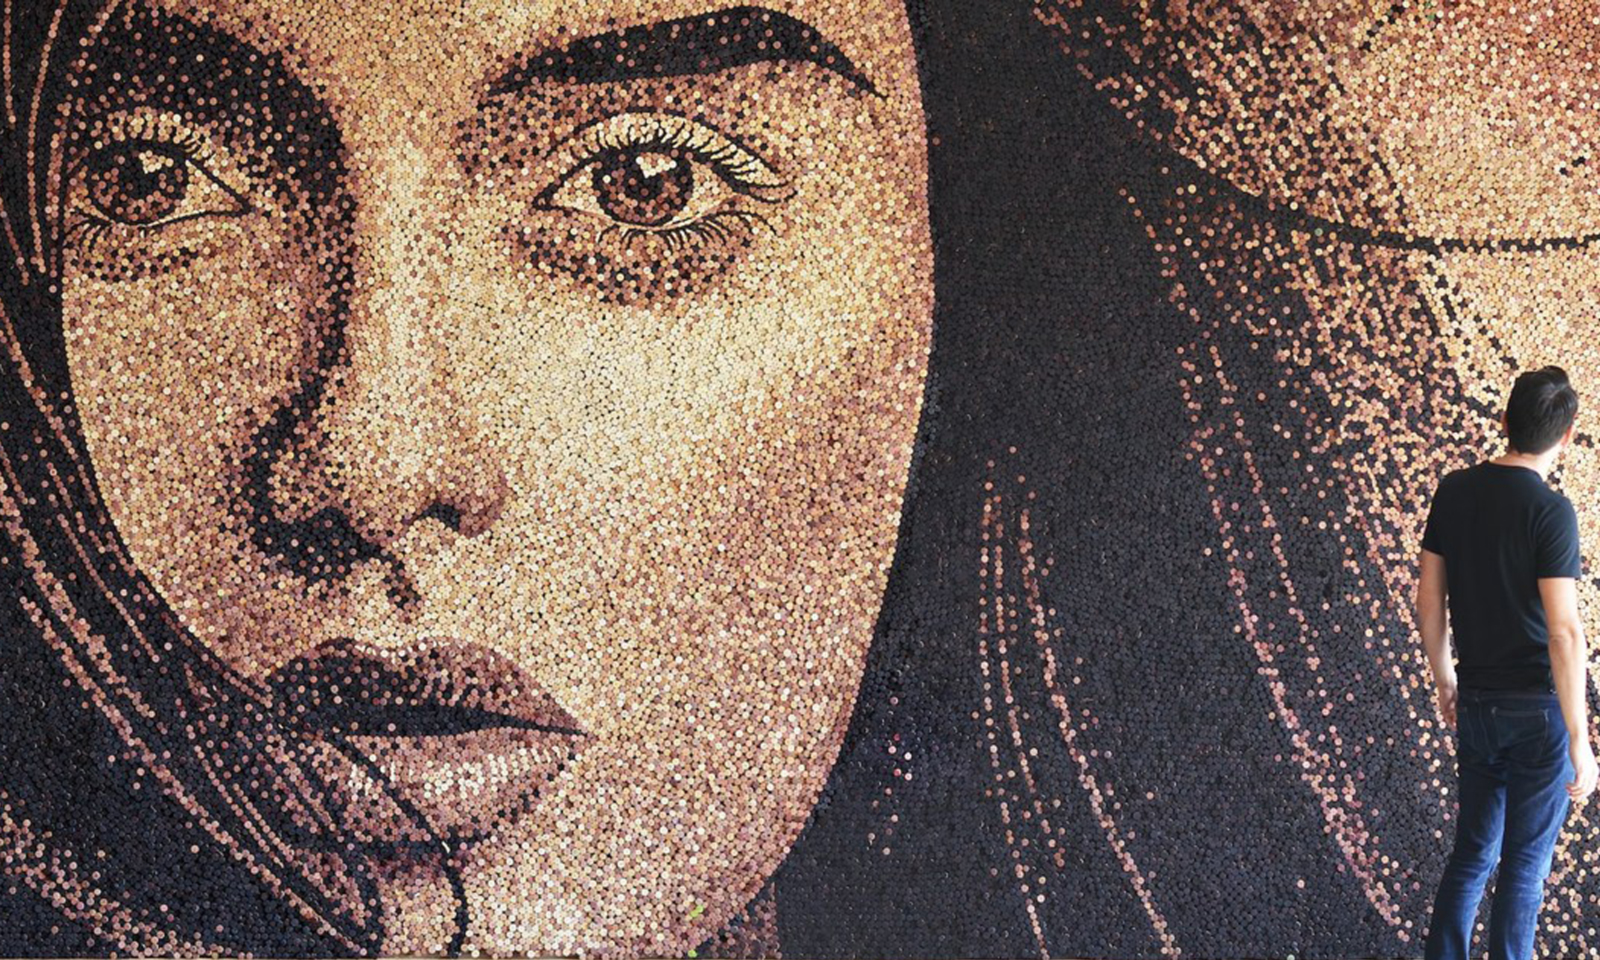 Artist Scott Gundersen creates museum quality portraits with hundreds of thousands of corks